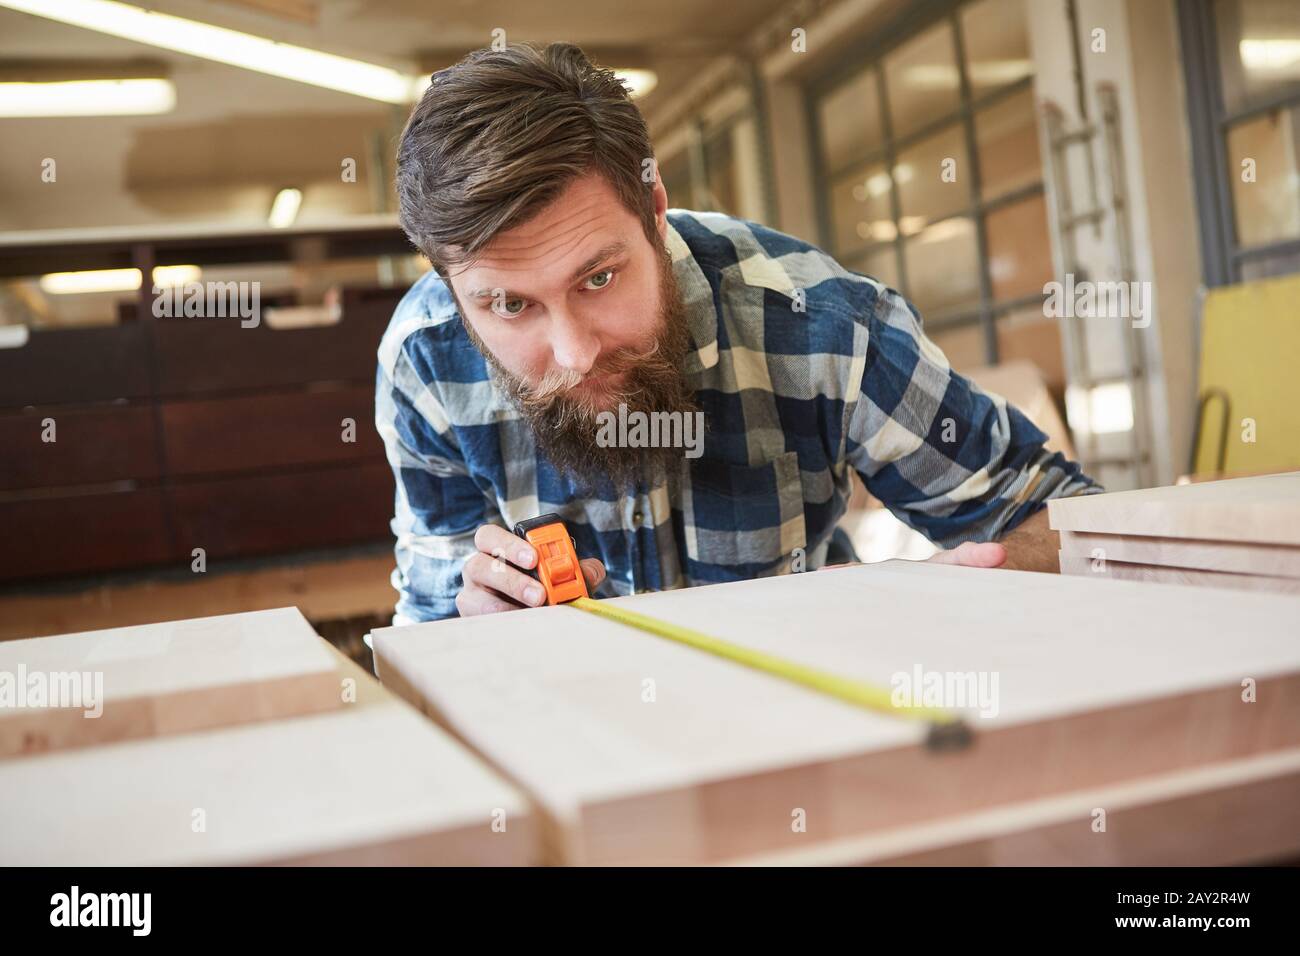 Carpenter apprentice with ruler measuring wood in carpentry Stock Photo